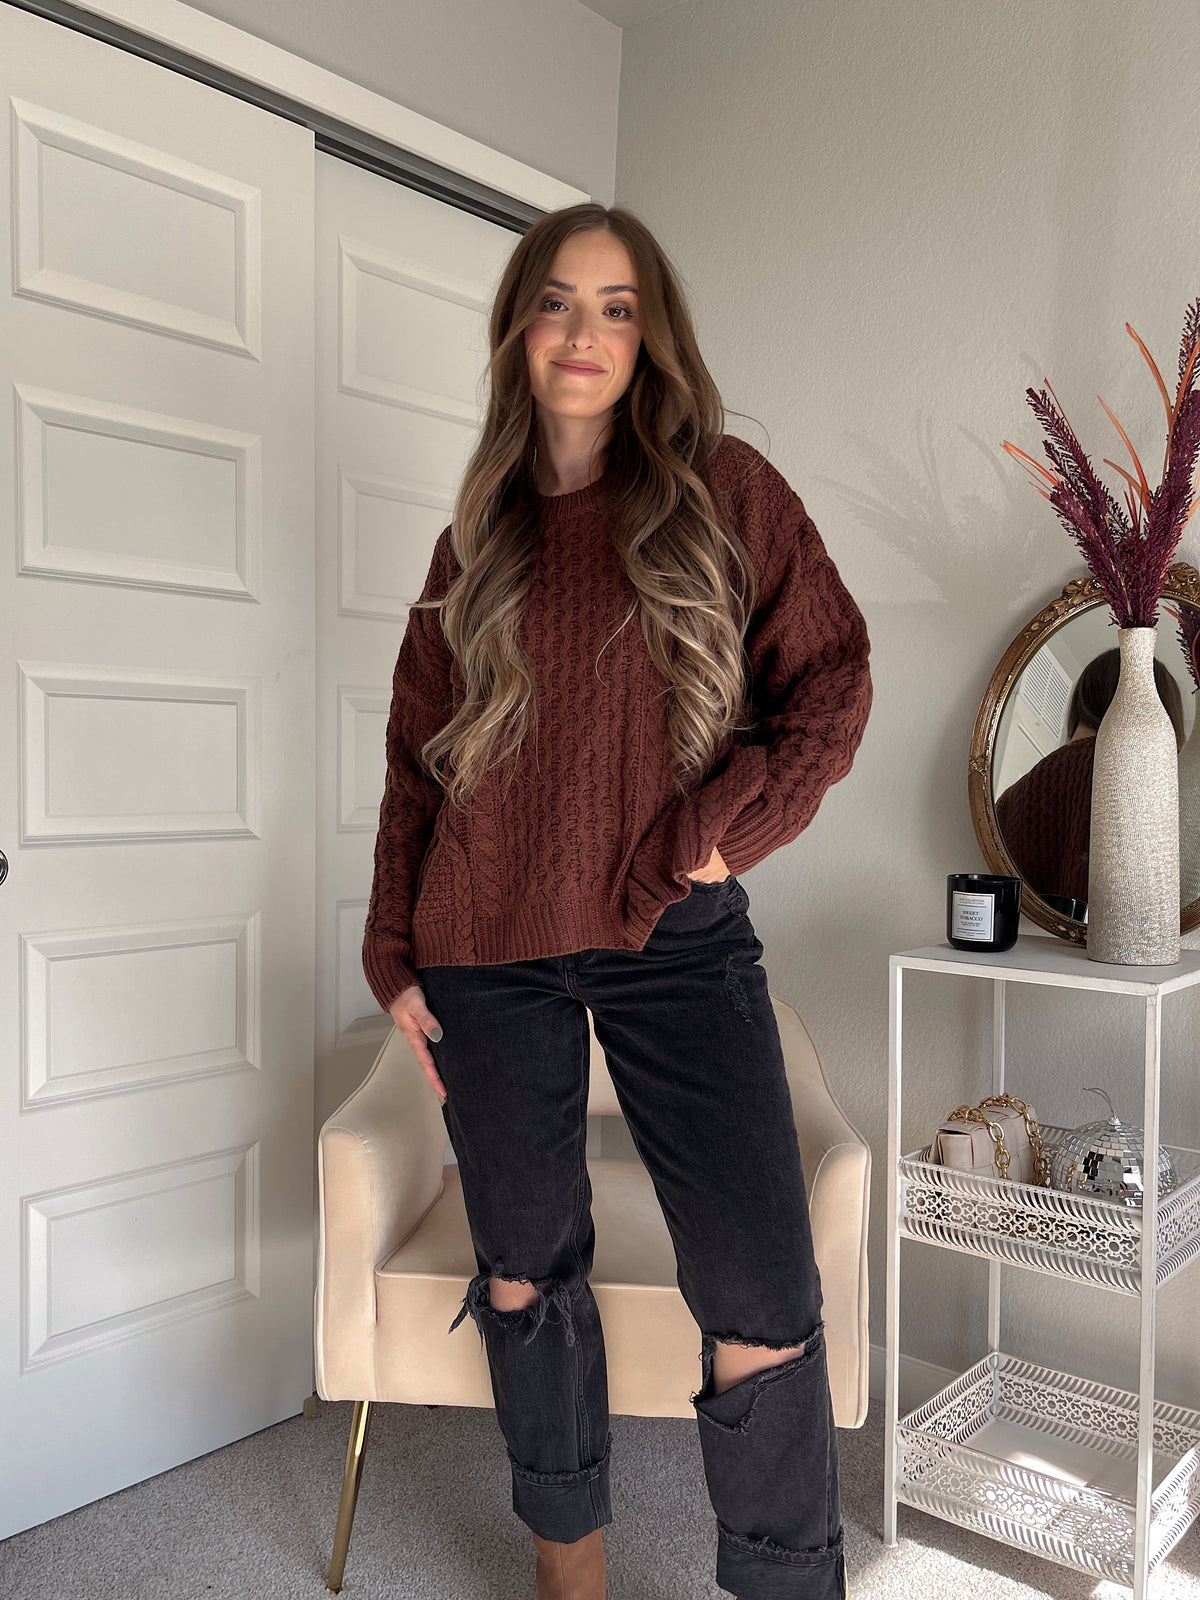 Stowe Braided Cable Knit Sweater (Chocolate Brown)